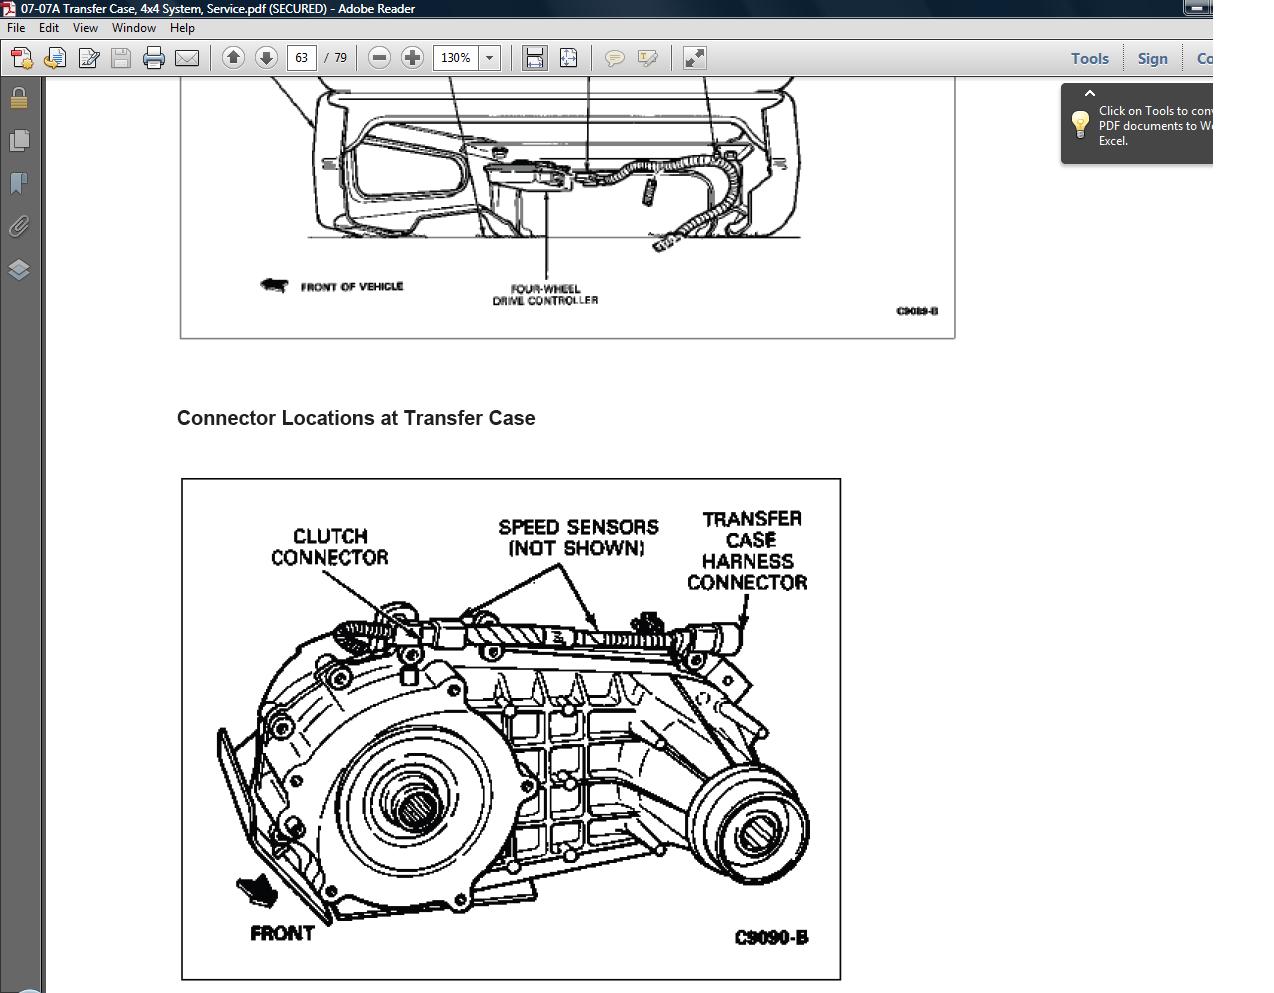 2003 Ford ranger service manual free download #9